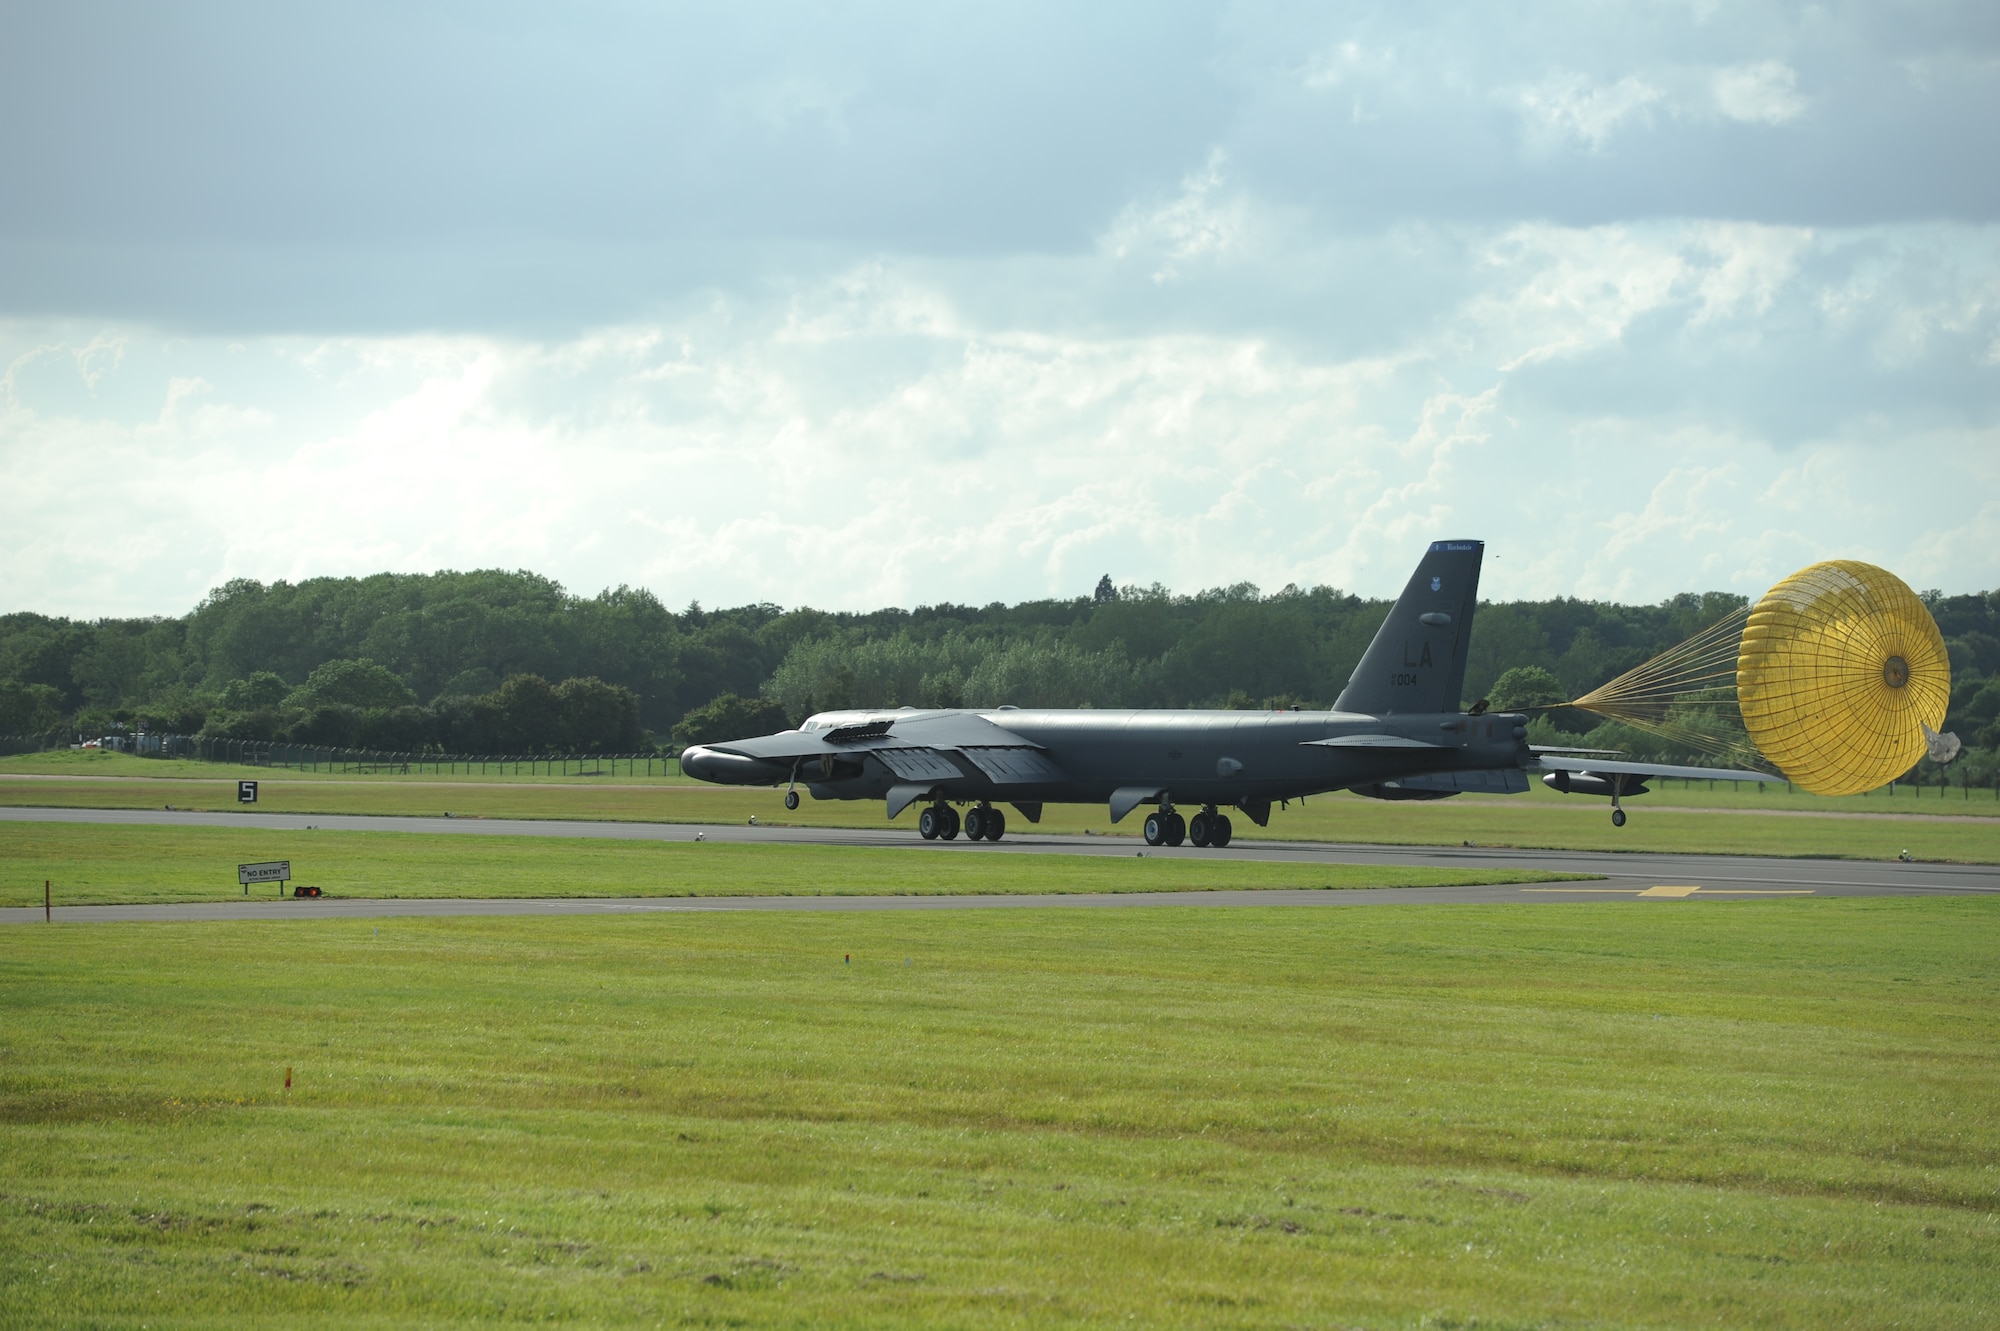 A B-52 Stratofortress from Air Force Global Strike Command lands at Royal Air Force Base Fairford, United Kingdom, June 7, 2014. Seventy years ago, Eighth Air Force supported a planned Allied invasion at Normandy with strategic heavy bombers and fighters during D-Day on June 6, 1944. The B-52 flew over Normandy to honor those Service members who fought and gave the ultimate sacrifice that day. (U.S. Air Force photo by Staff Sgt. Nick Wilson/Released)